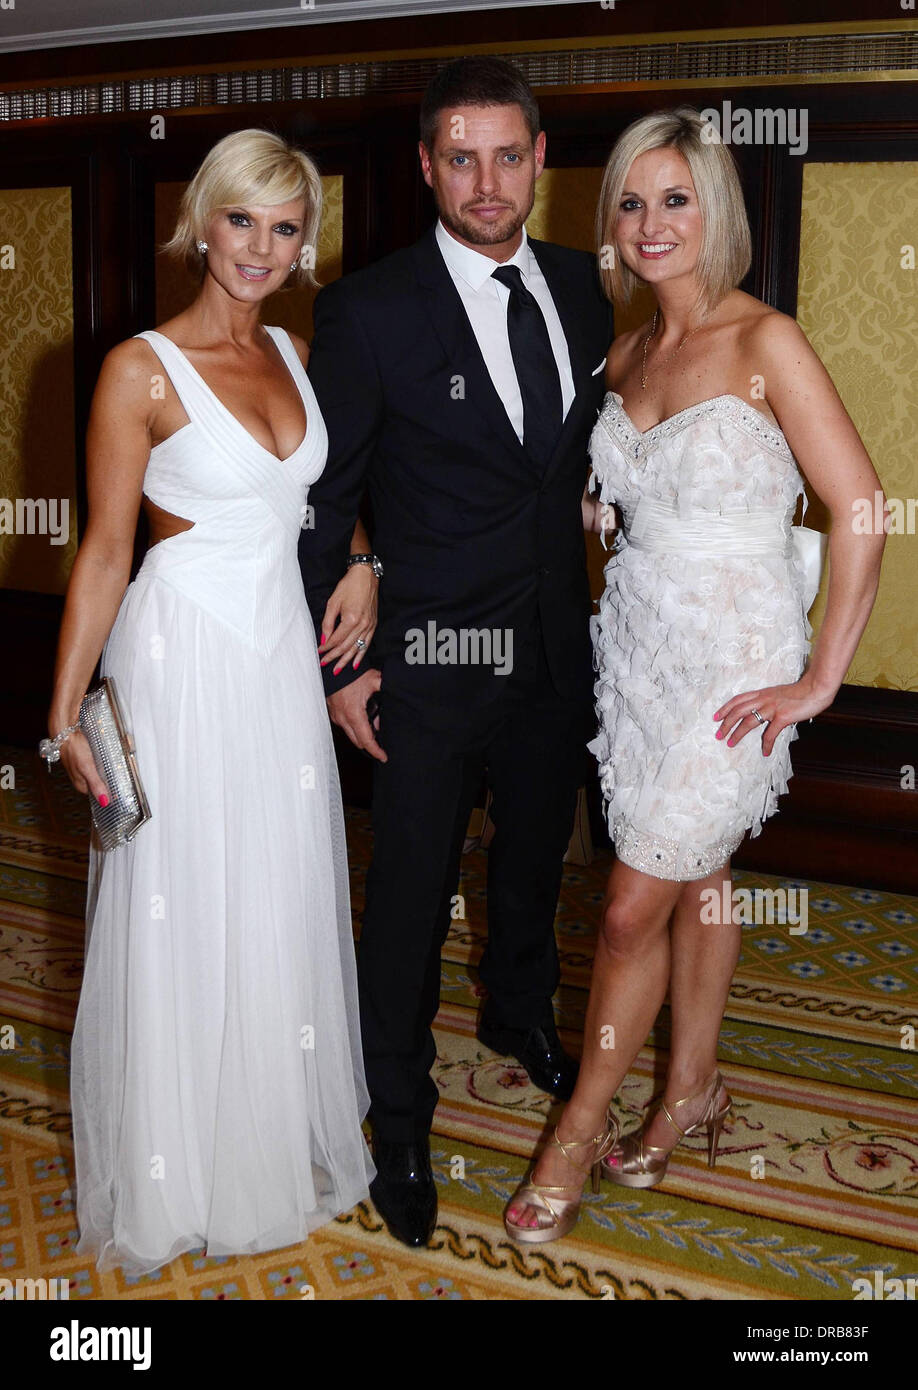 Keith Duffy And Lisa Duffy High Resolution Stock Photography and Images -  Alamy